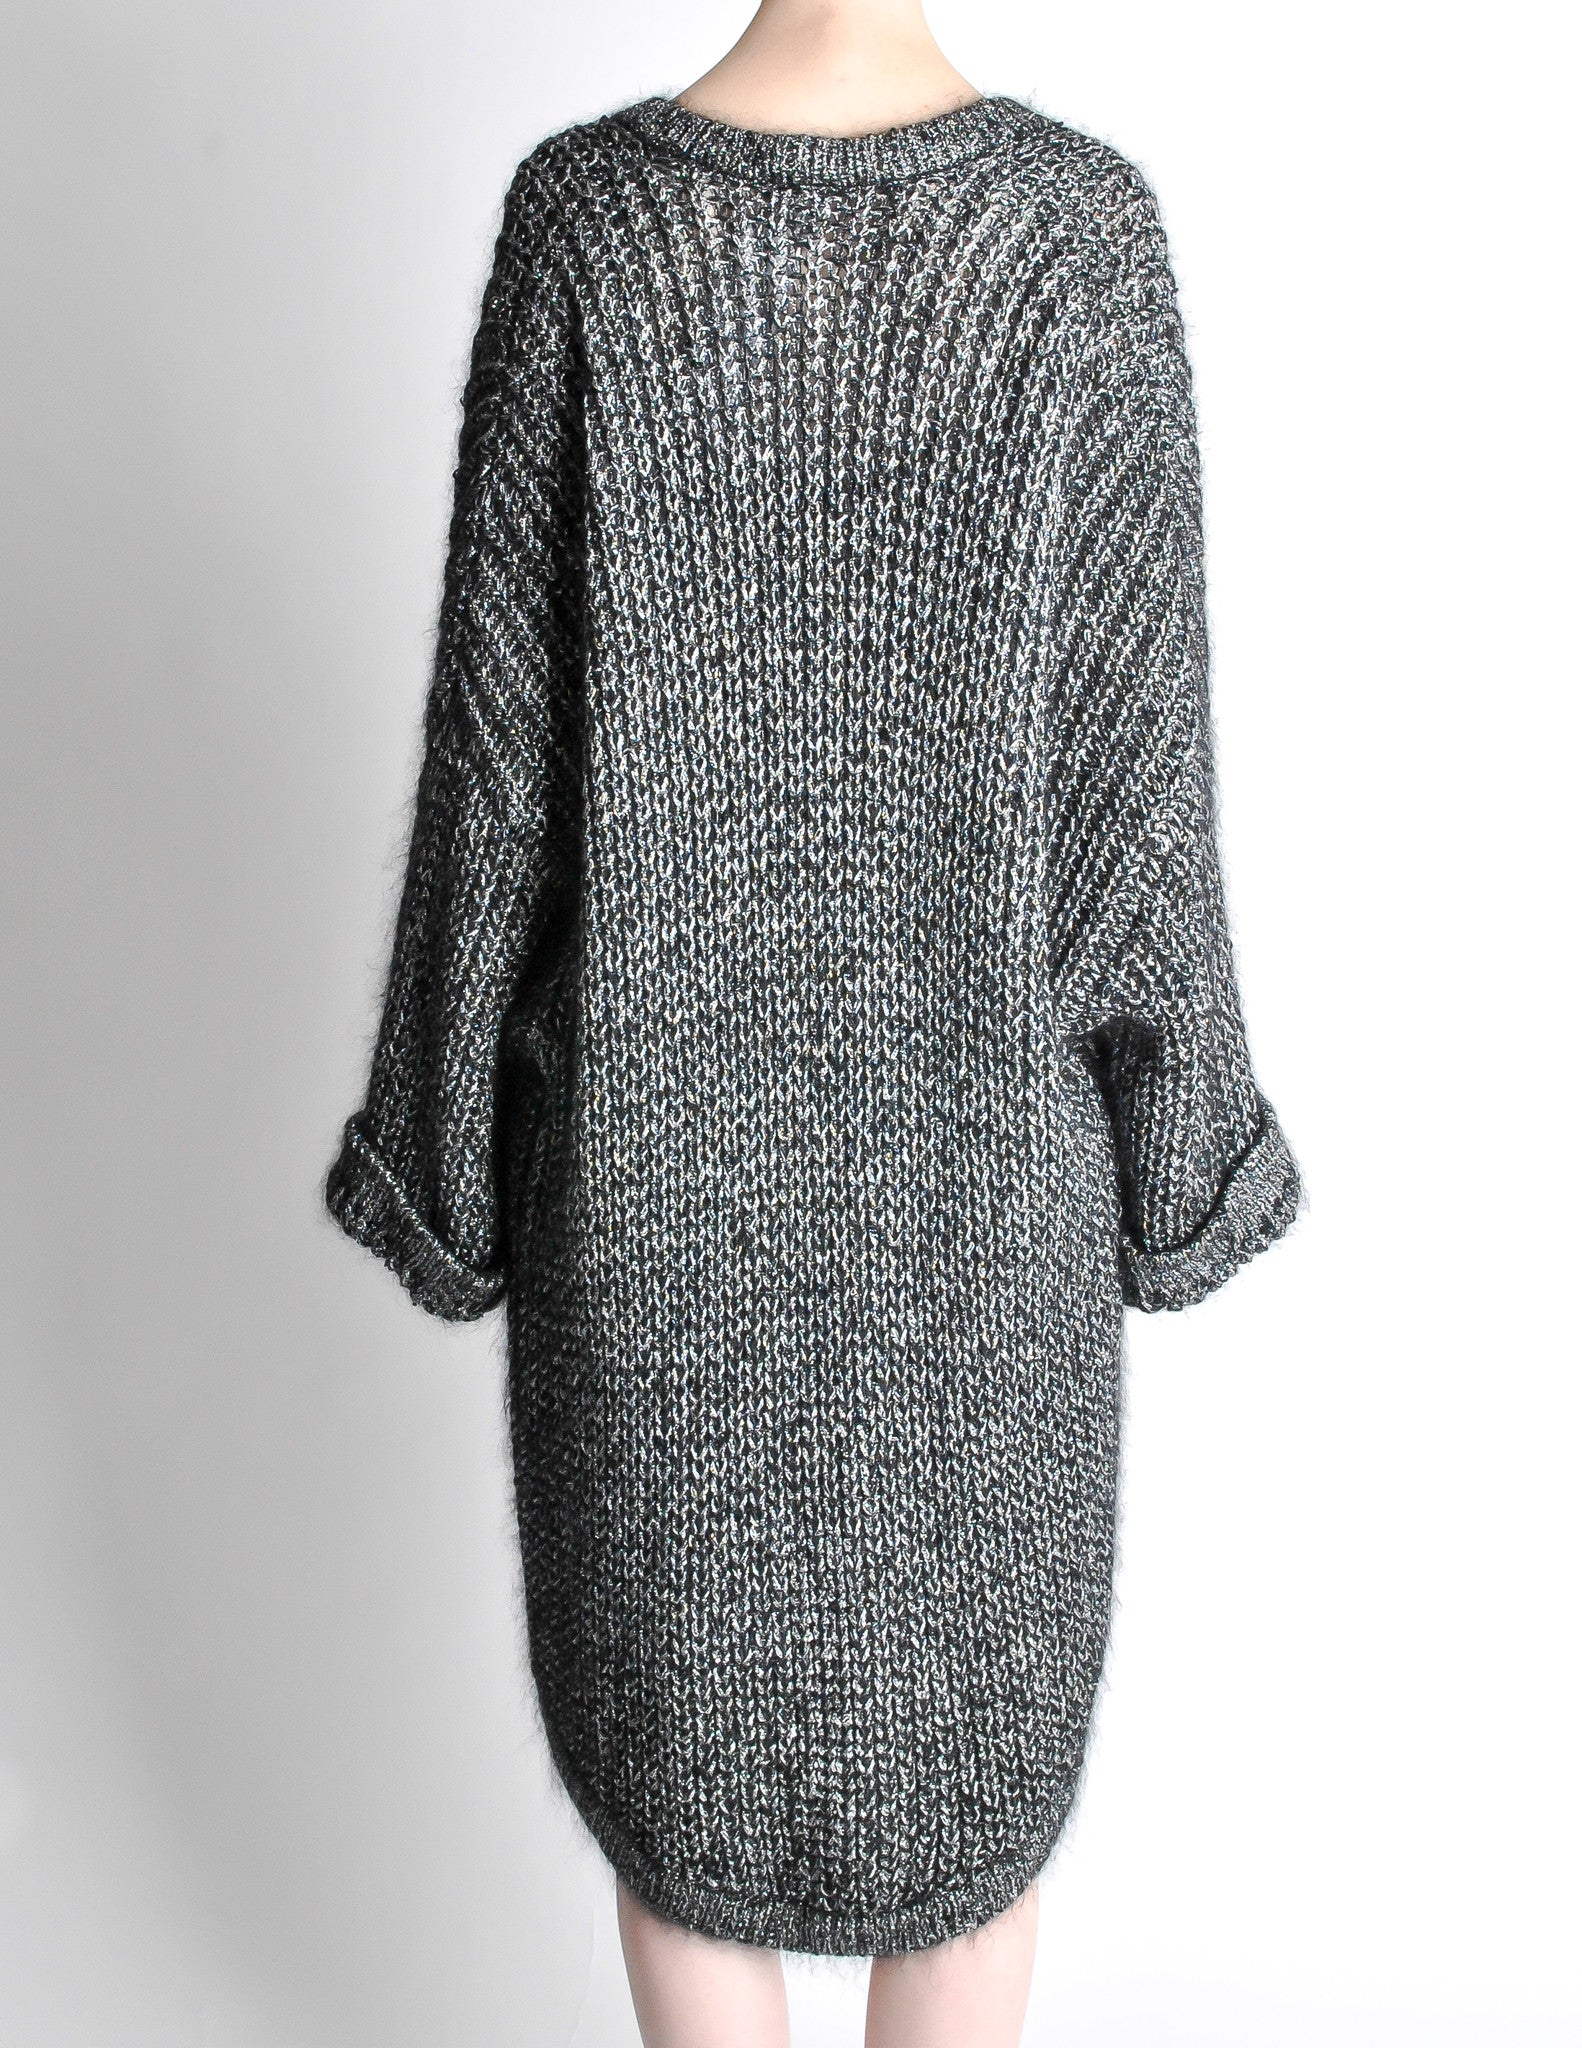 Krizia Vintage Black and Silver Oversized Cardigan - from Amarcord ...